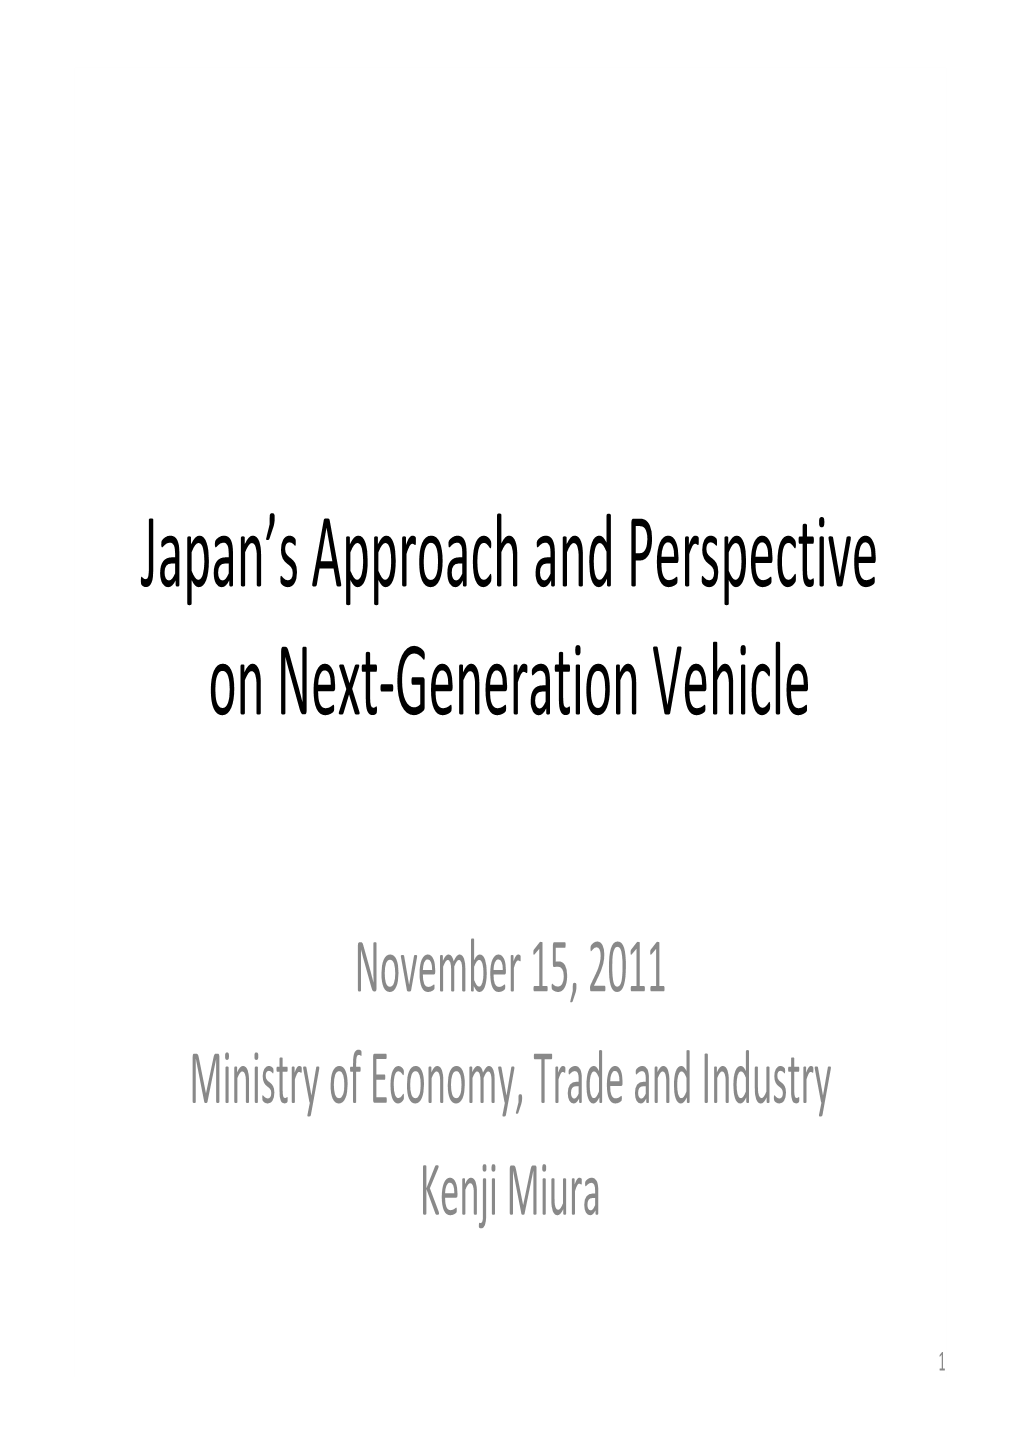 Japan's Approach and Perspective on Next-Generation Vehicle